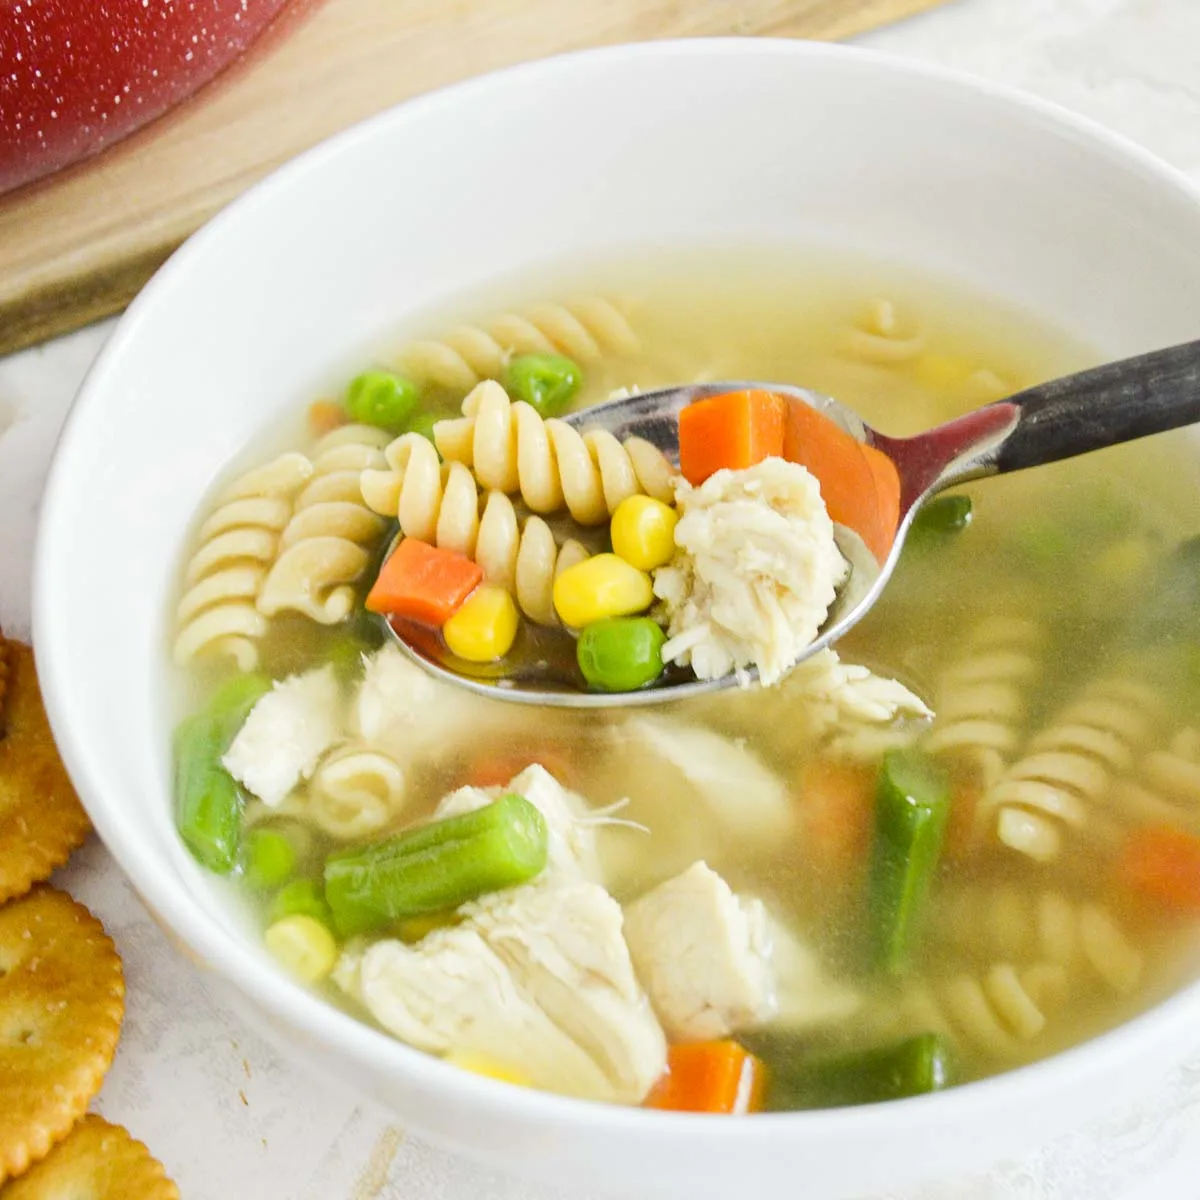 Spoon of chicken noodle soup with vegetables